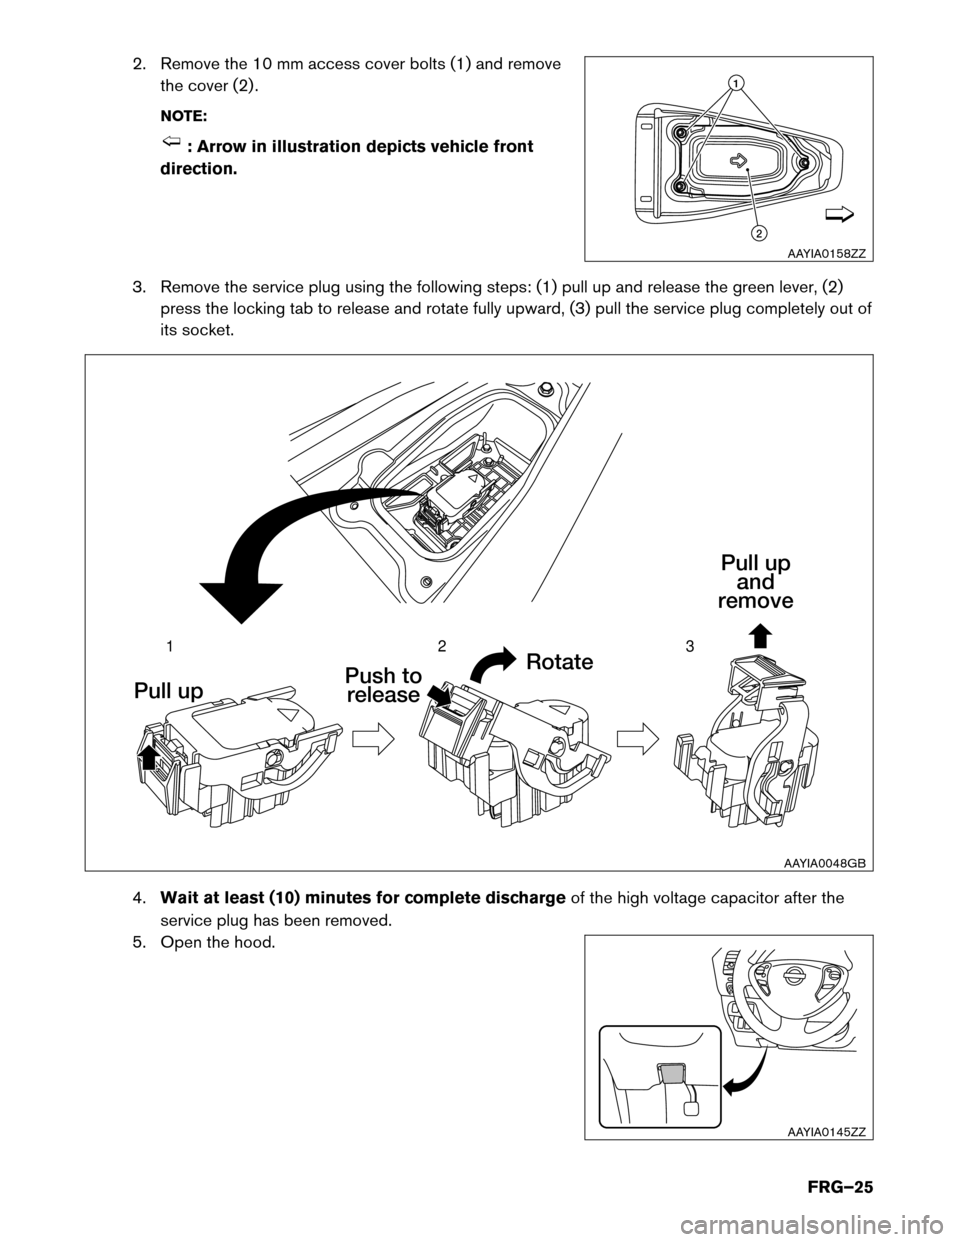 NISSAN LEAF 2016 1.G First Responders Guide 2. Remove the 10 mm access cover bolts (1) and remove
the cover (2) .
NOTE: : Arrow in illustration depicts vehicle front
direction.
3.

Remove the service plug using the following steps: (1) pull up 